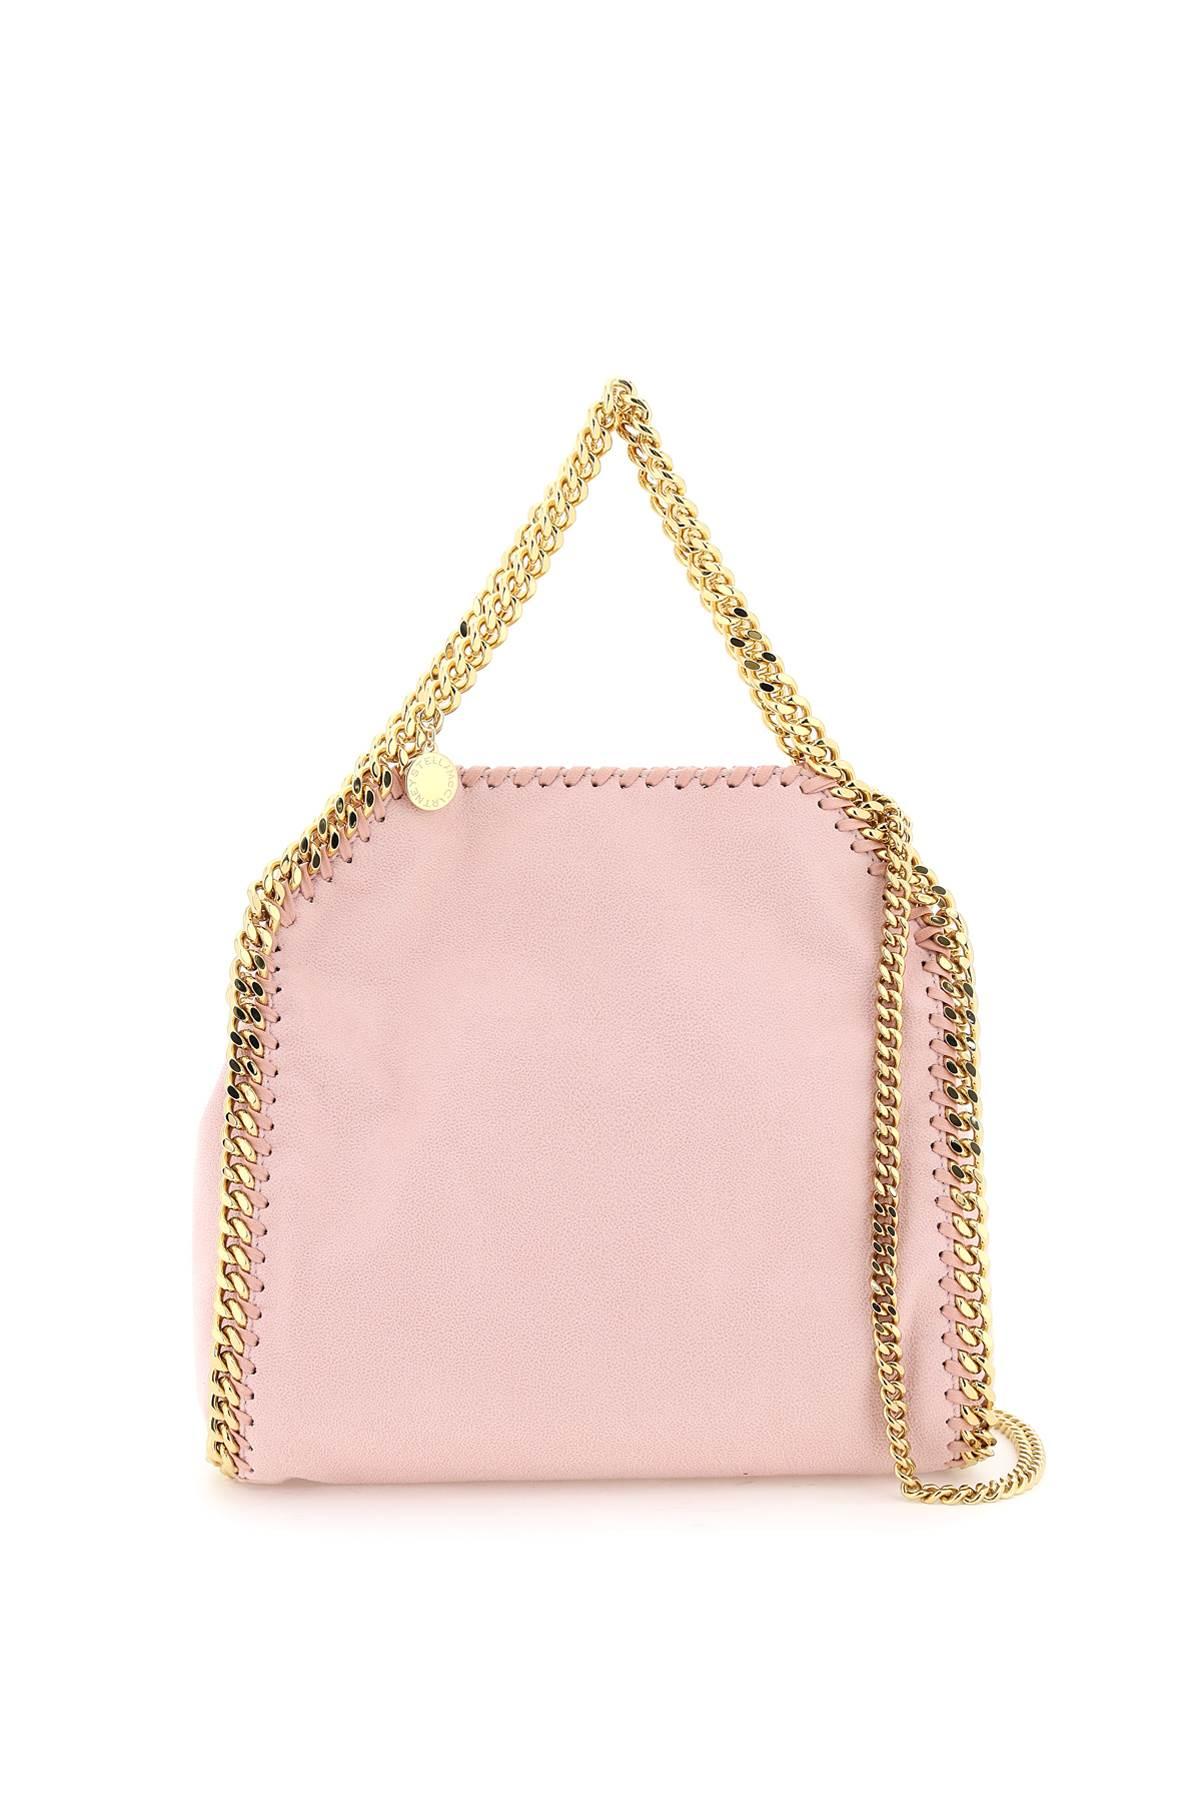 Stella McCartney And Golden Mini Falabella Tote Bag in Pink | Lyst